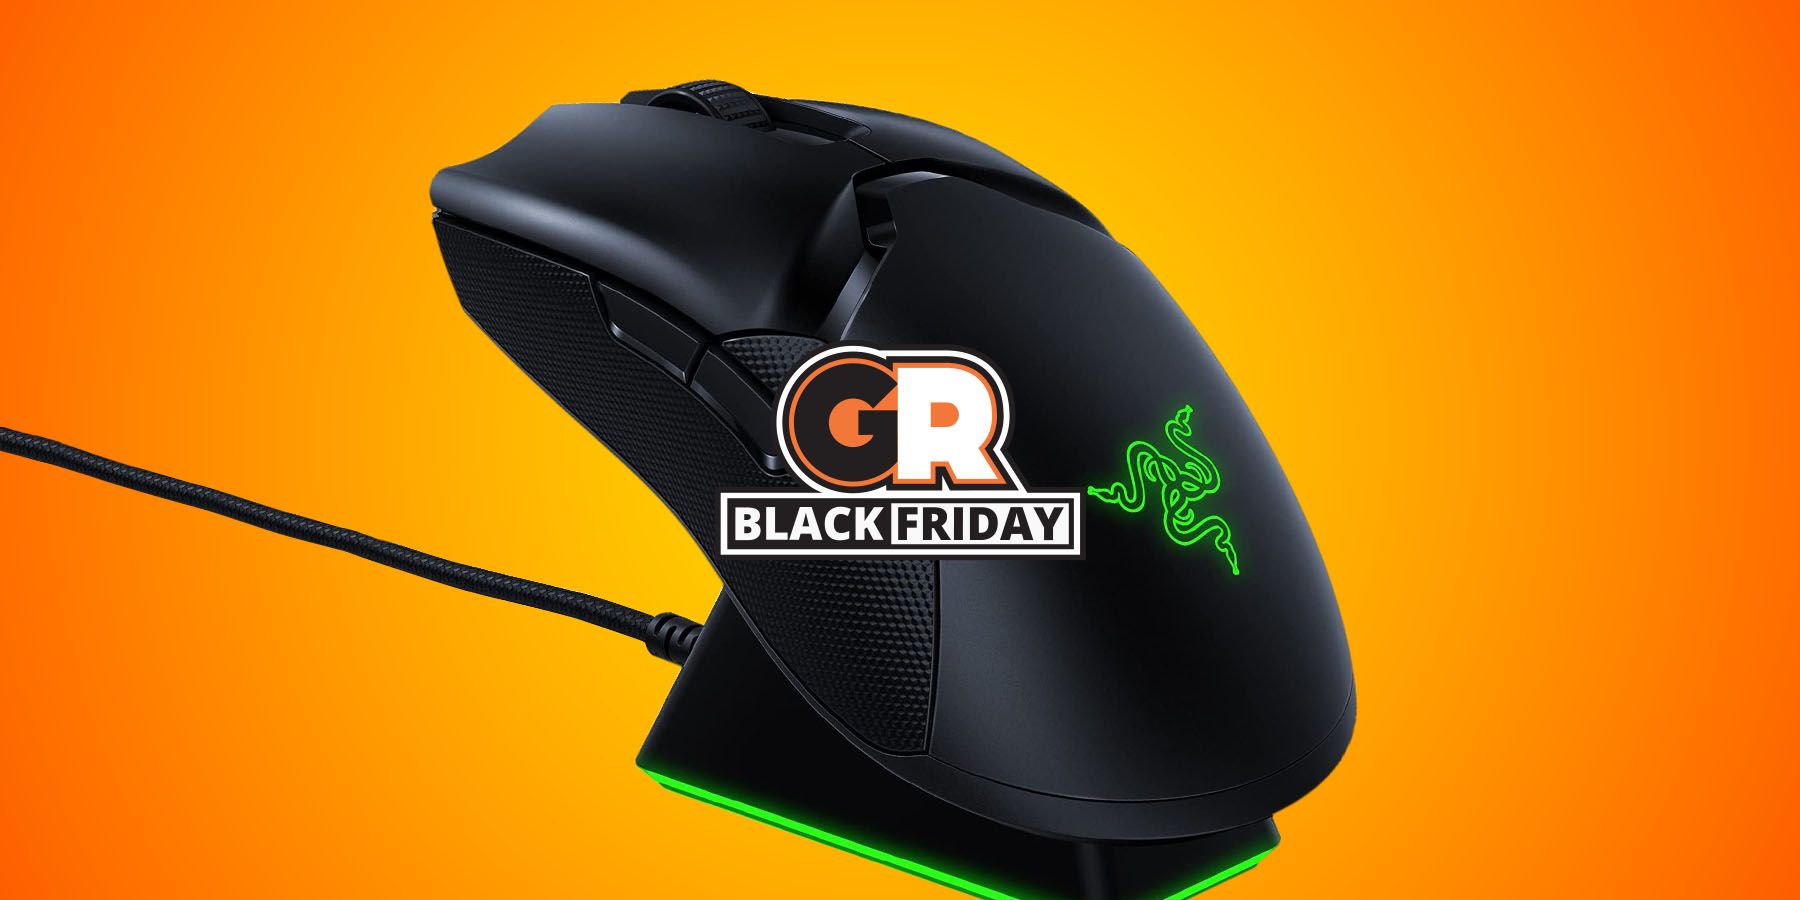 These 4 Gaming Mice Are Still Over 50% Off For Black Friday